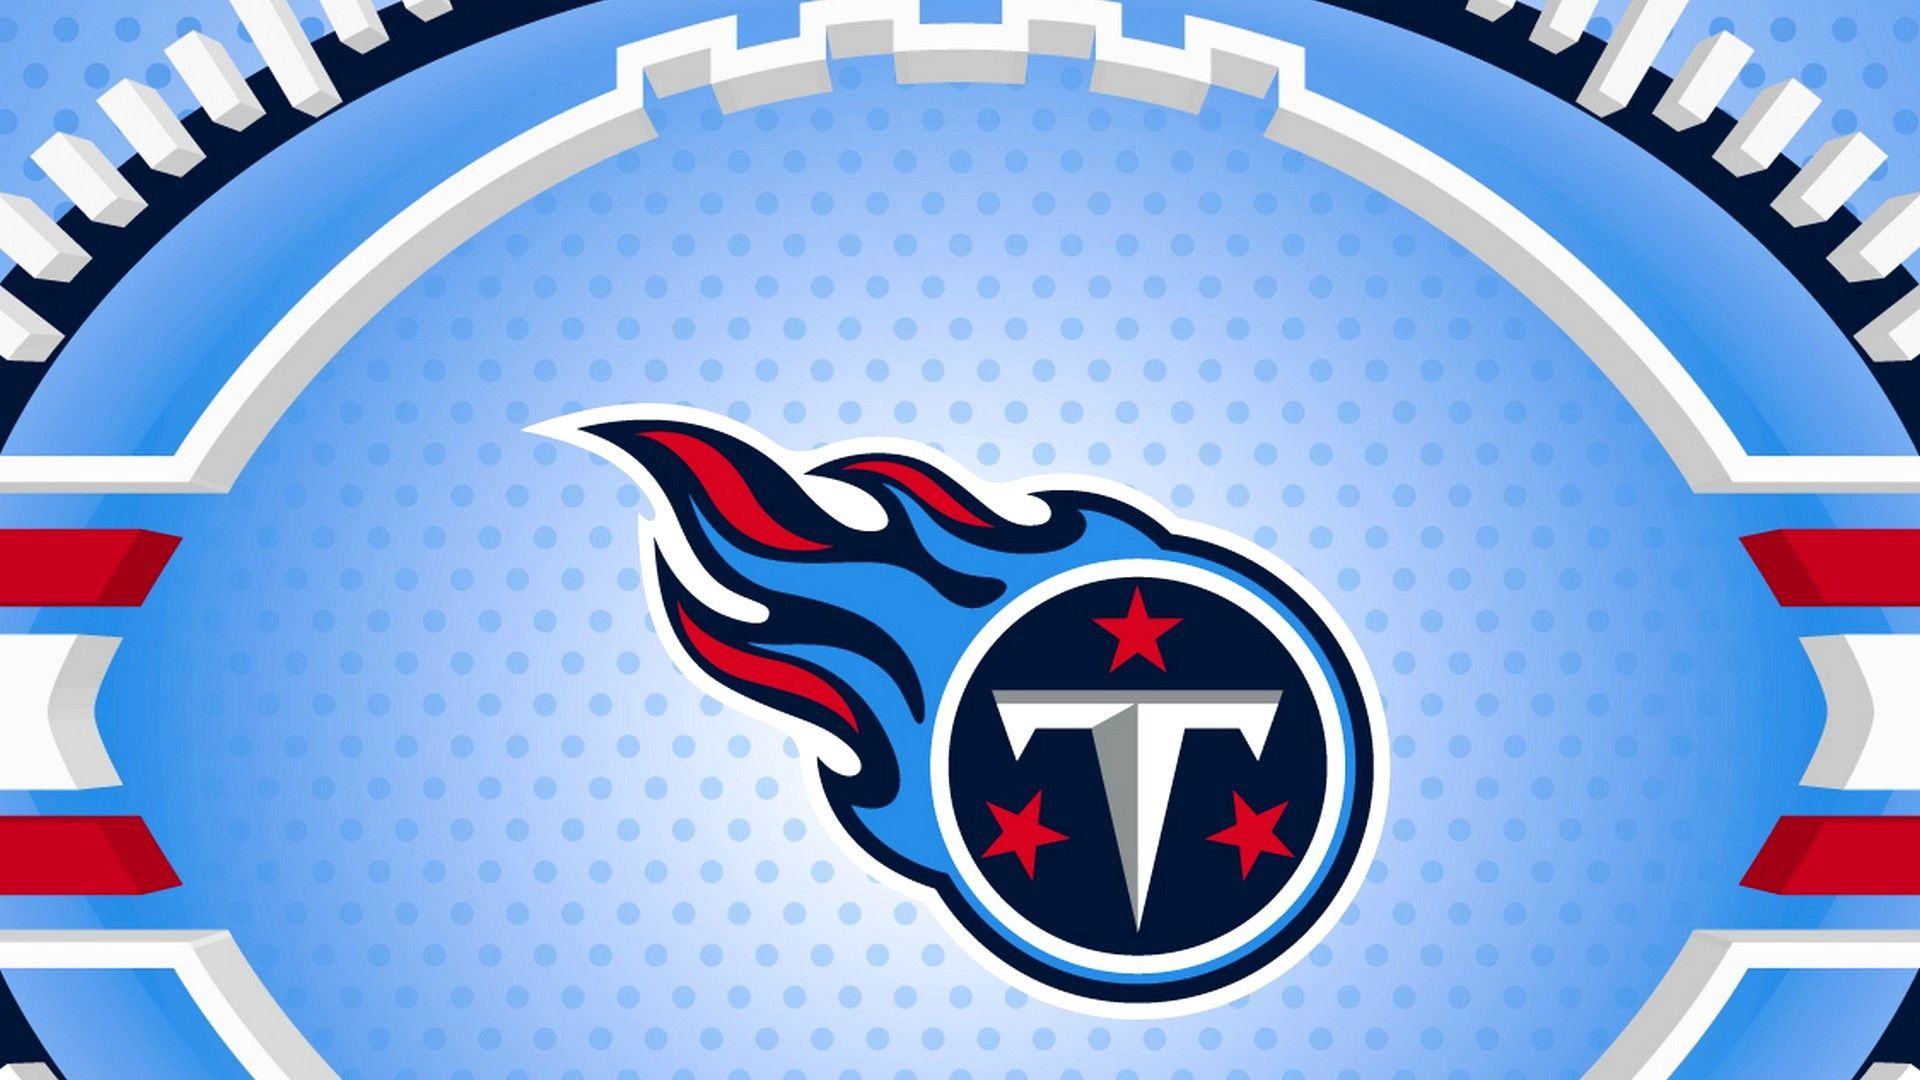 Tennessee Titans Wallpapers 4k Hd Tennessee Titans Backgrounds On Wallpaperbat